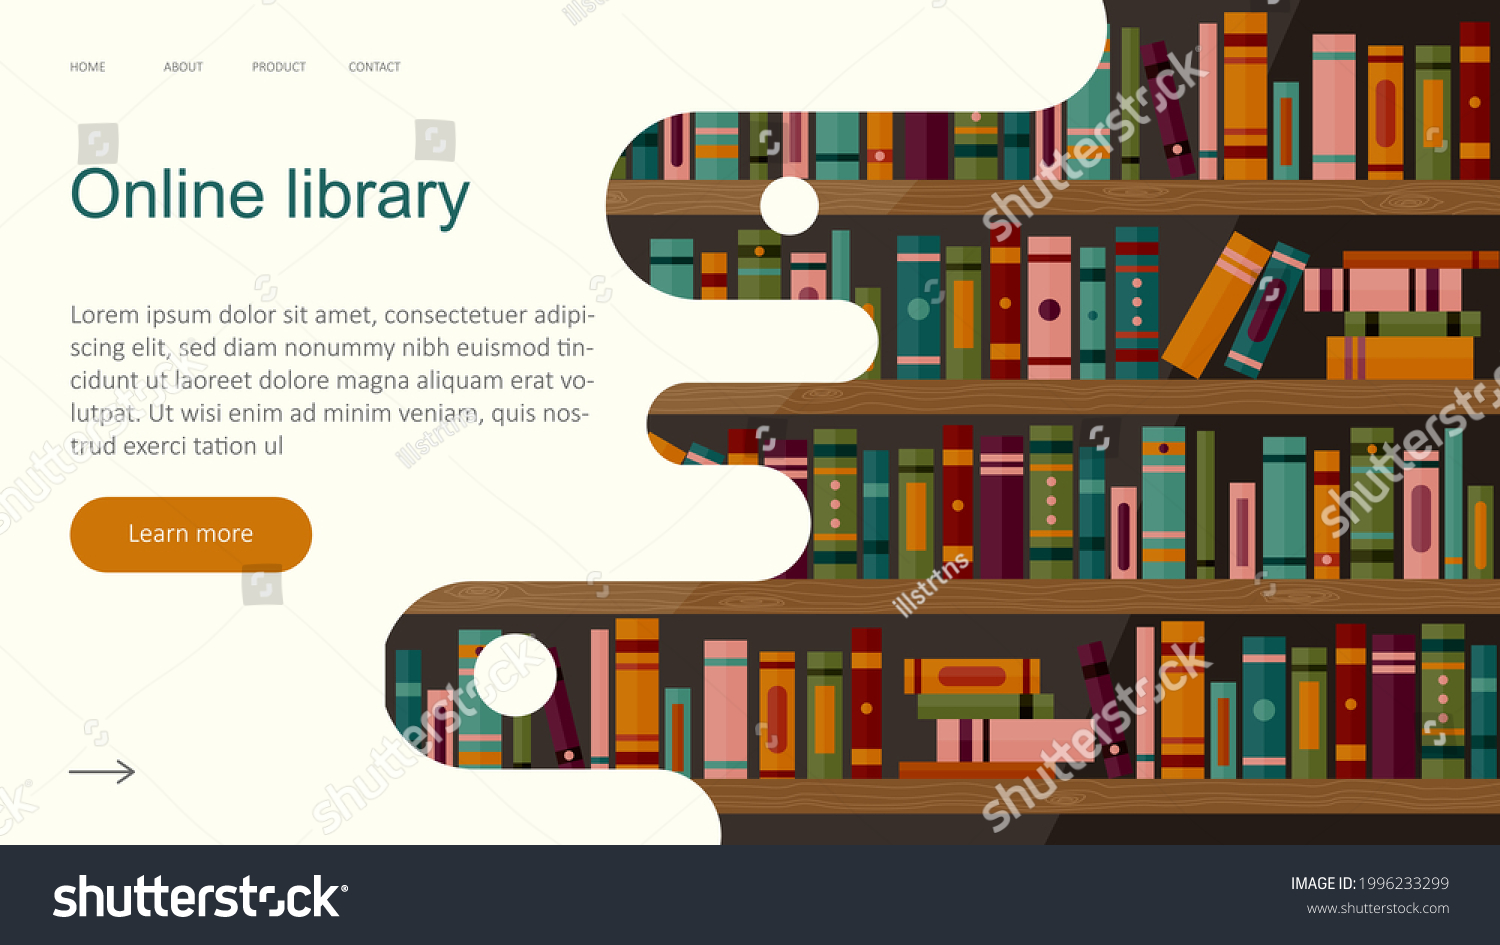 Online library app for reading, banner, website template. Electronic book store application on background with bookshelves, digital technologies in education. Vector graphic. #1996233299